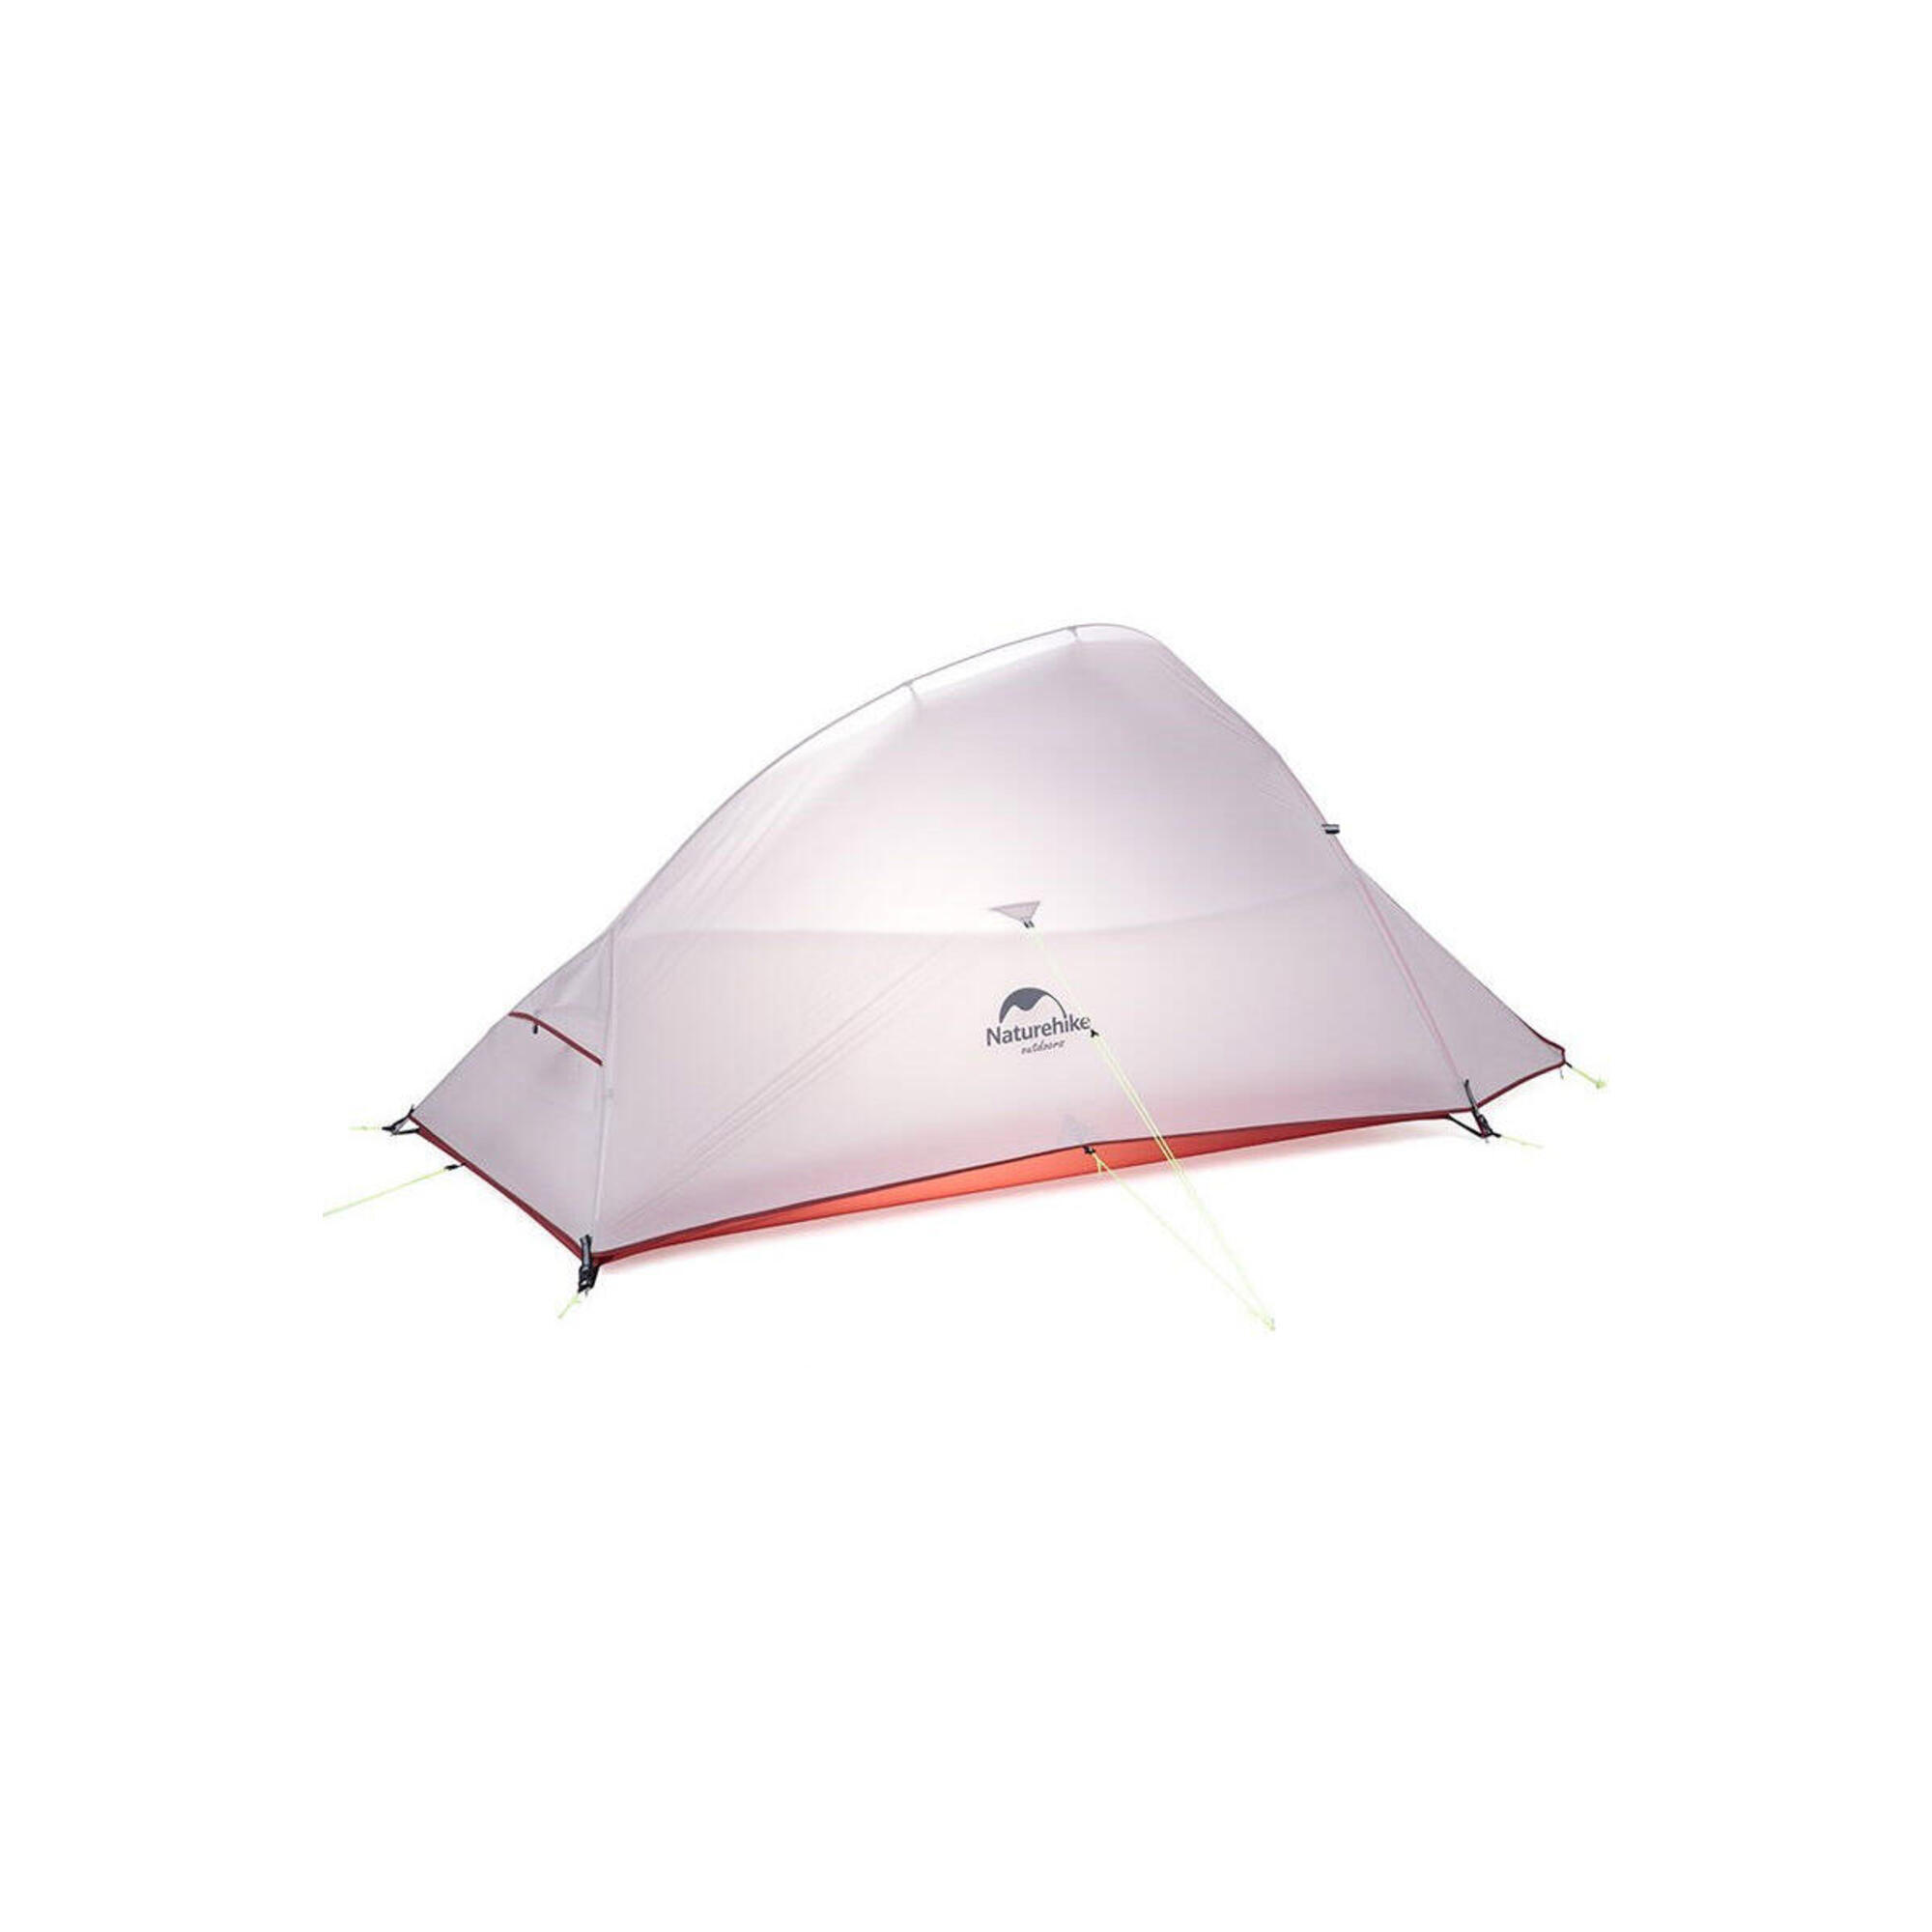 NAMIOT NATUREHIKE CLOUD UP 2 20D UPDATED NH17T001-T - LIGHT GREY-RED